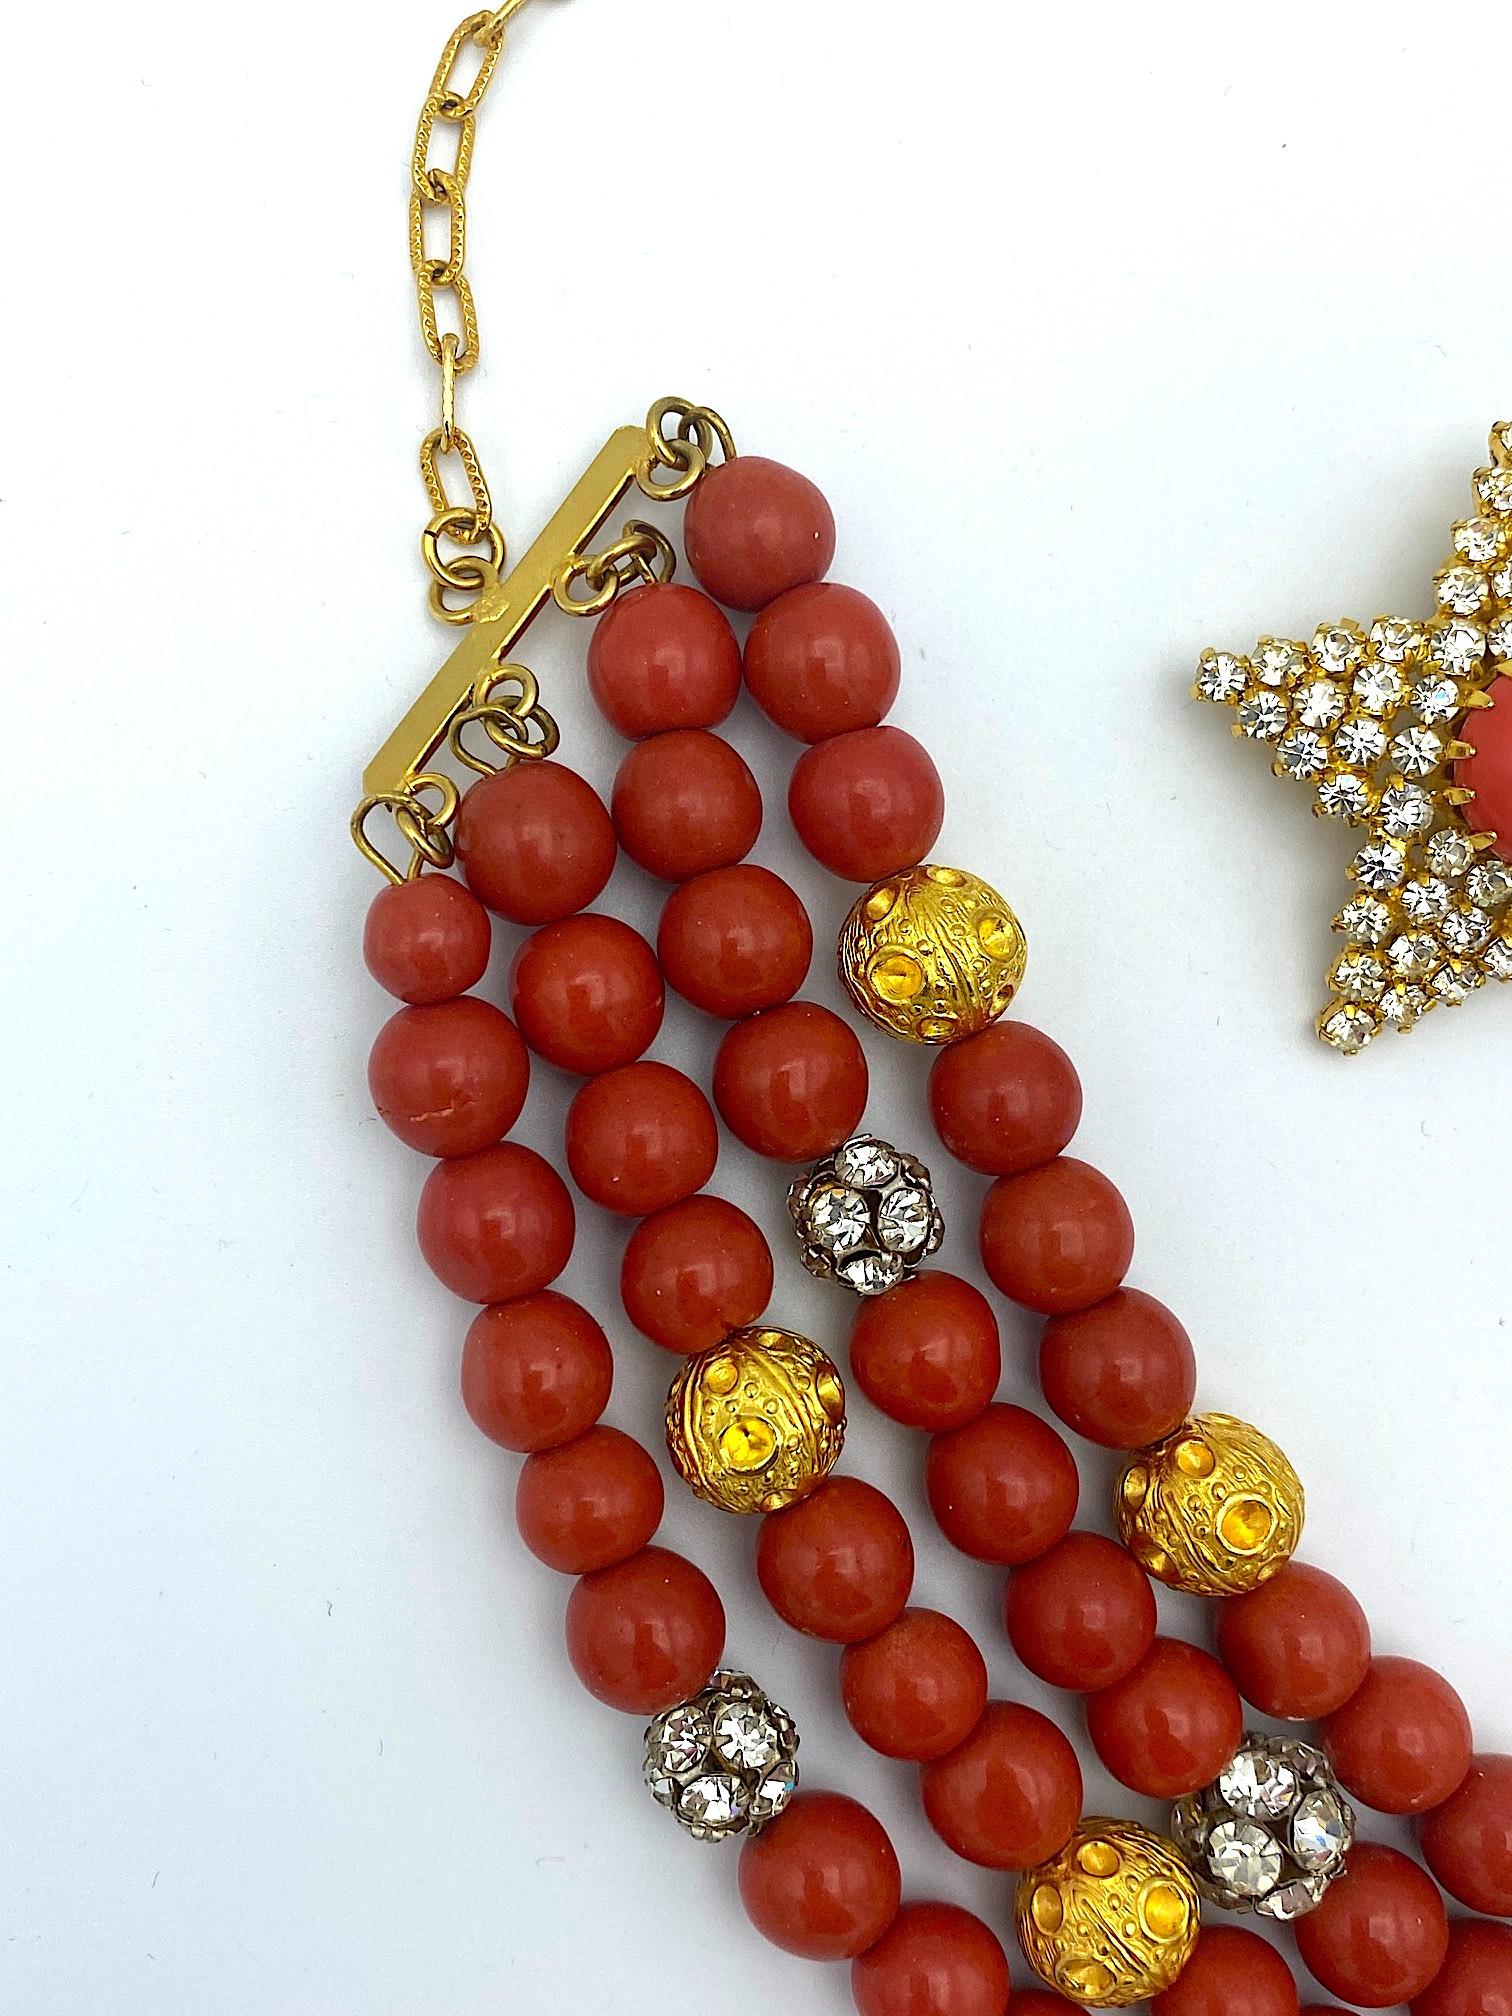 Principessa Helietta Caracciolo Faux Red Coral Choker Necklace and Earrings 10